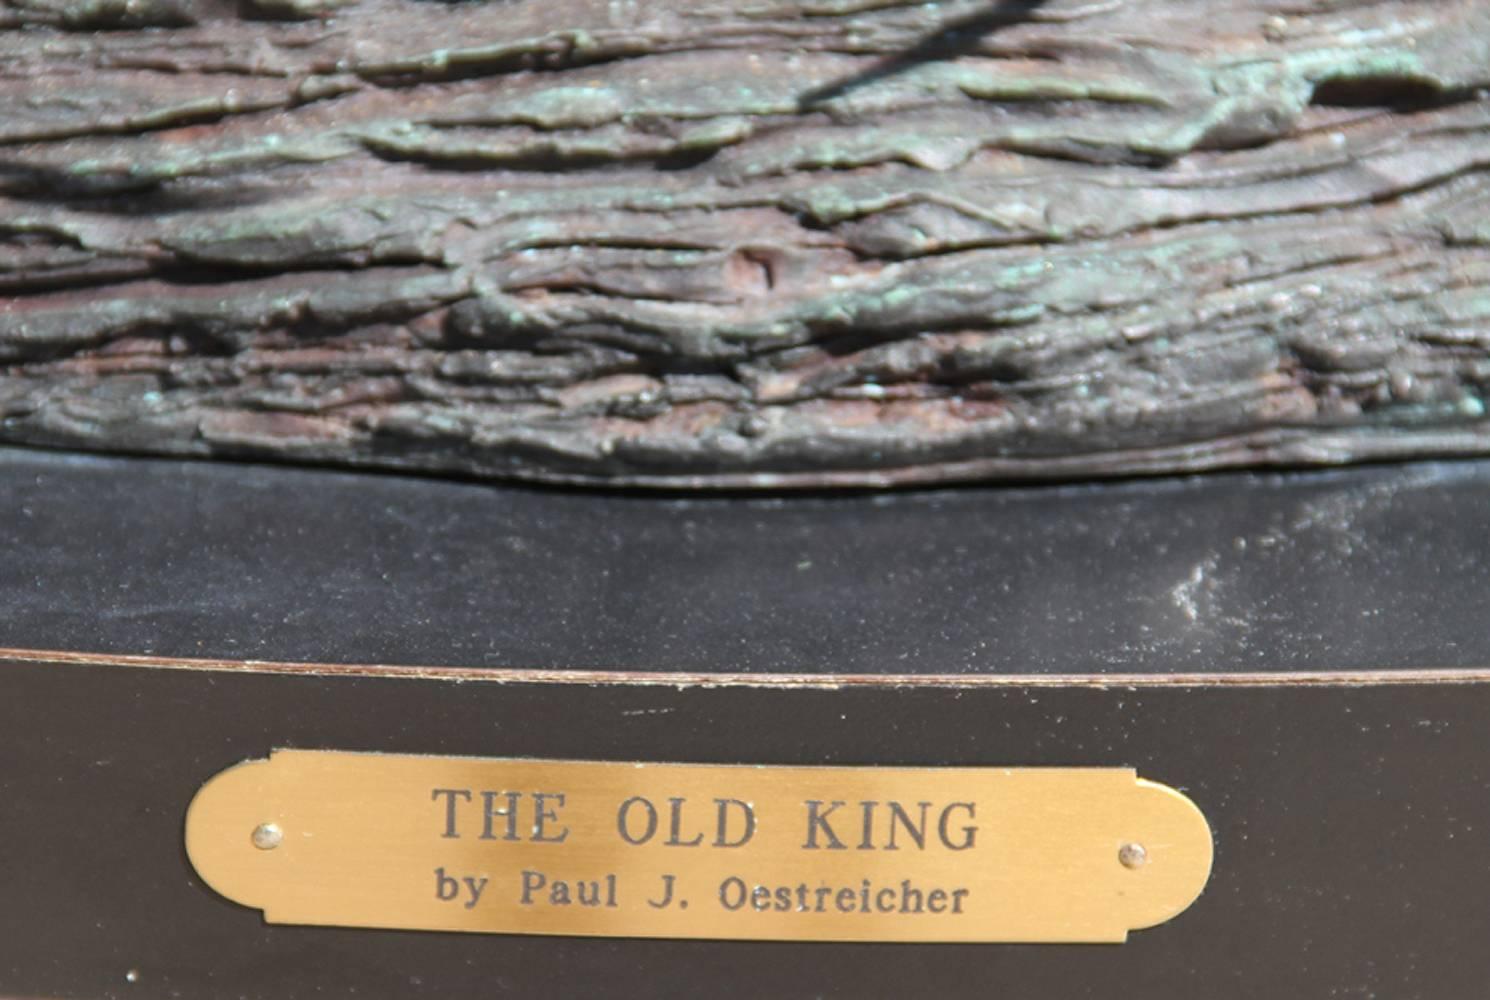 The Old King - Sculpture by Paul Oestreicher